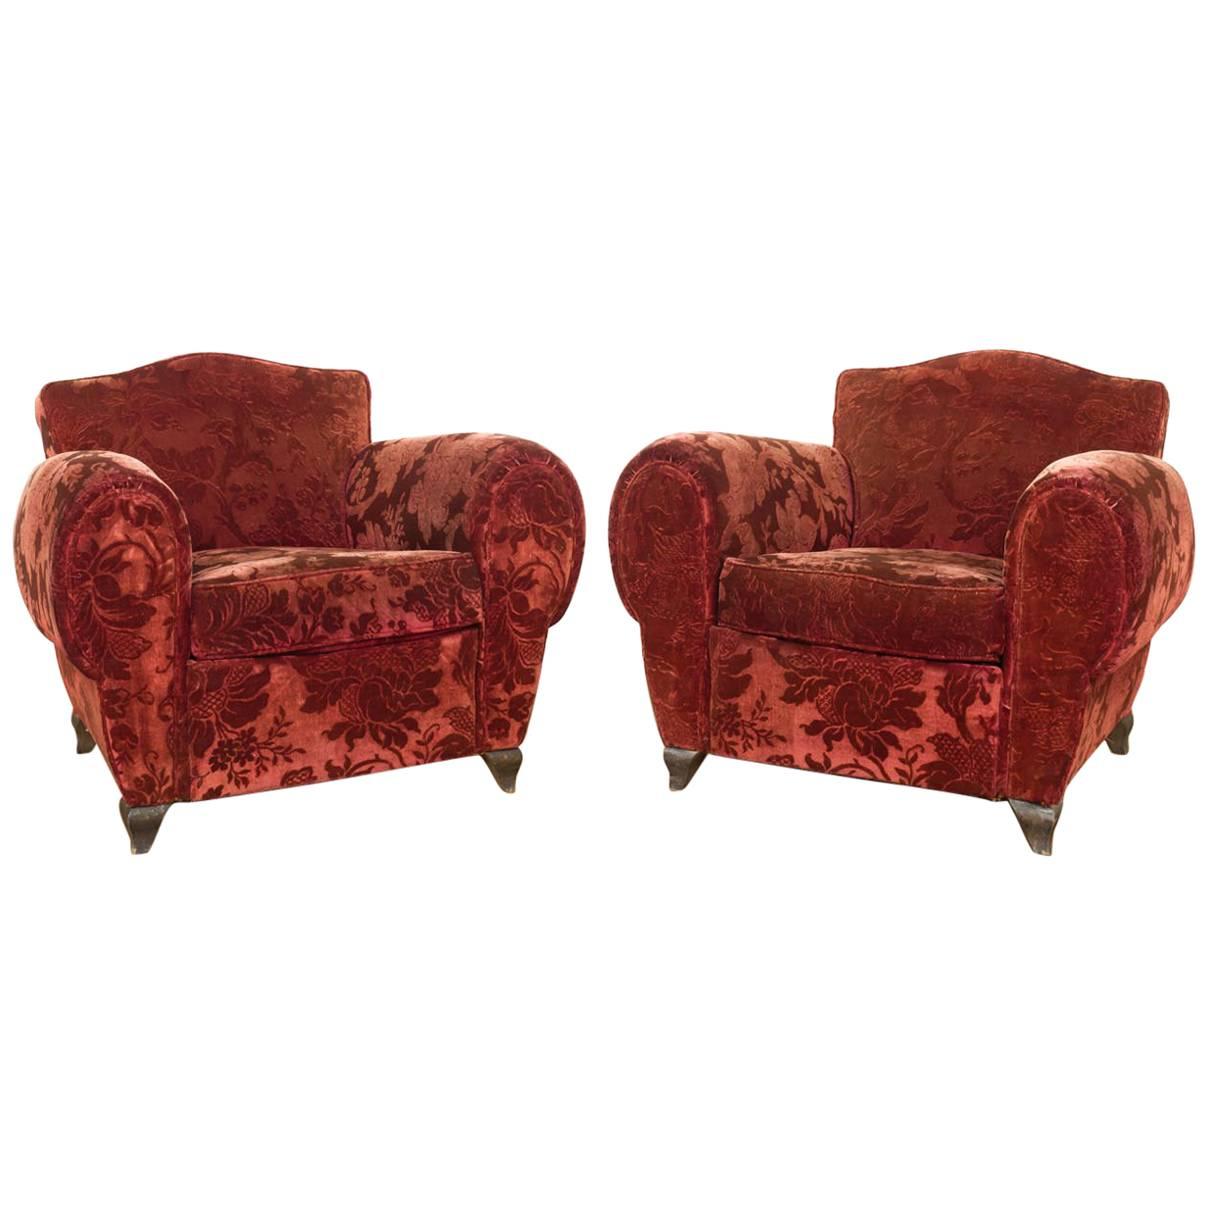 Pair of French Red Mohair Velvet Club Chairs with Floral Pattern For Sale